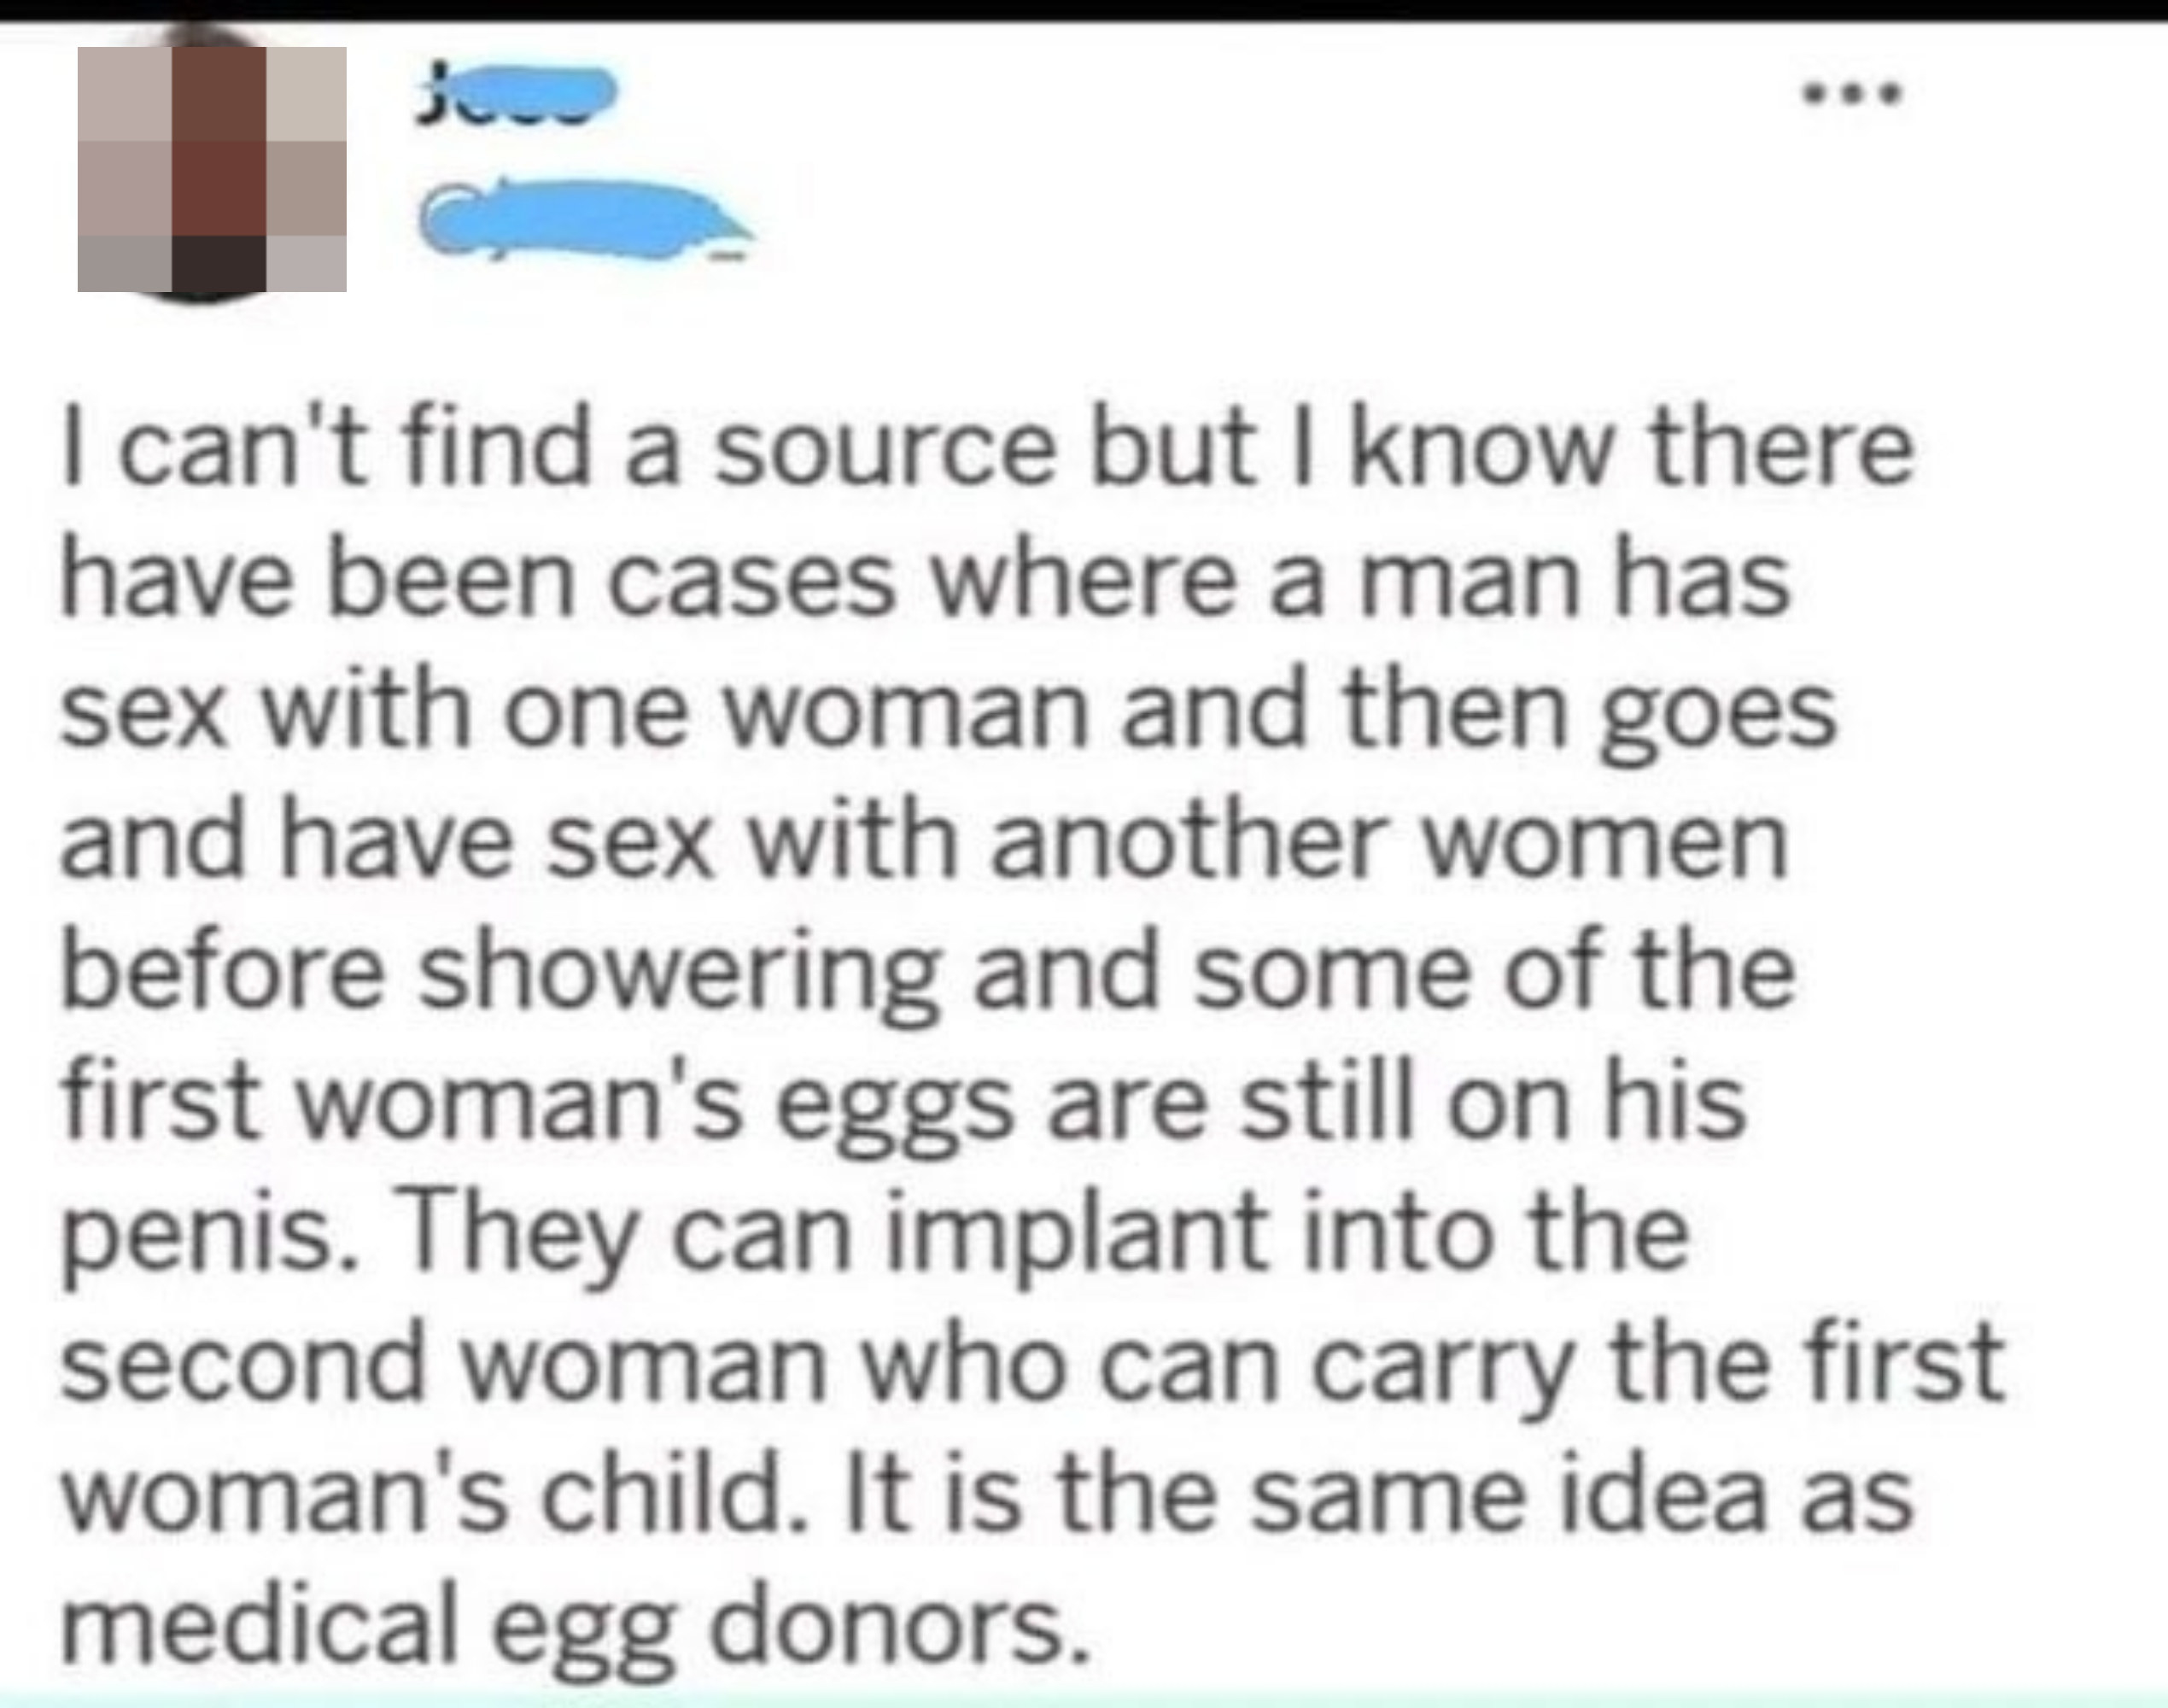 man saying that men can carry a woman&#x27;s eggs after having sex to another woman if he doesn&#x27;t shower in between. it&#x27;s the same as medical egg donors, they say